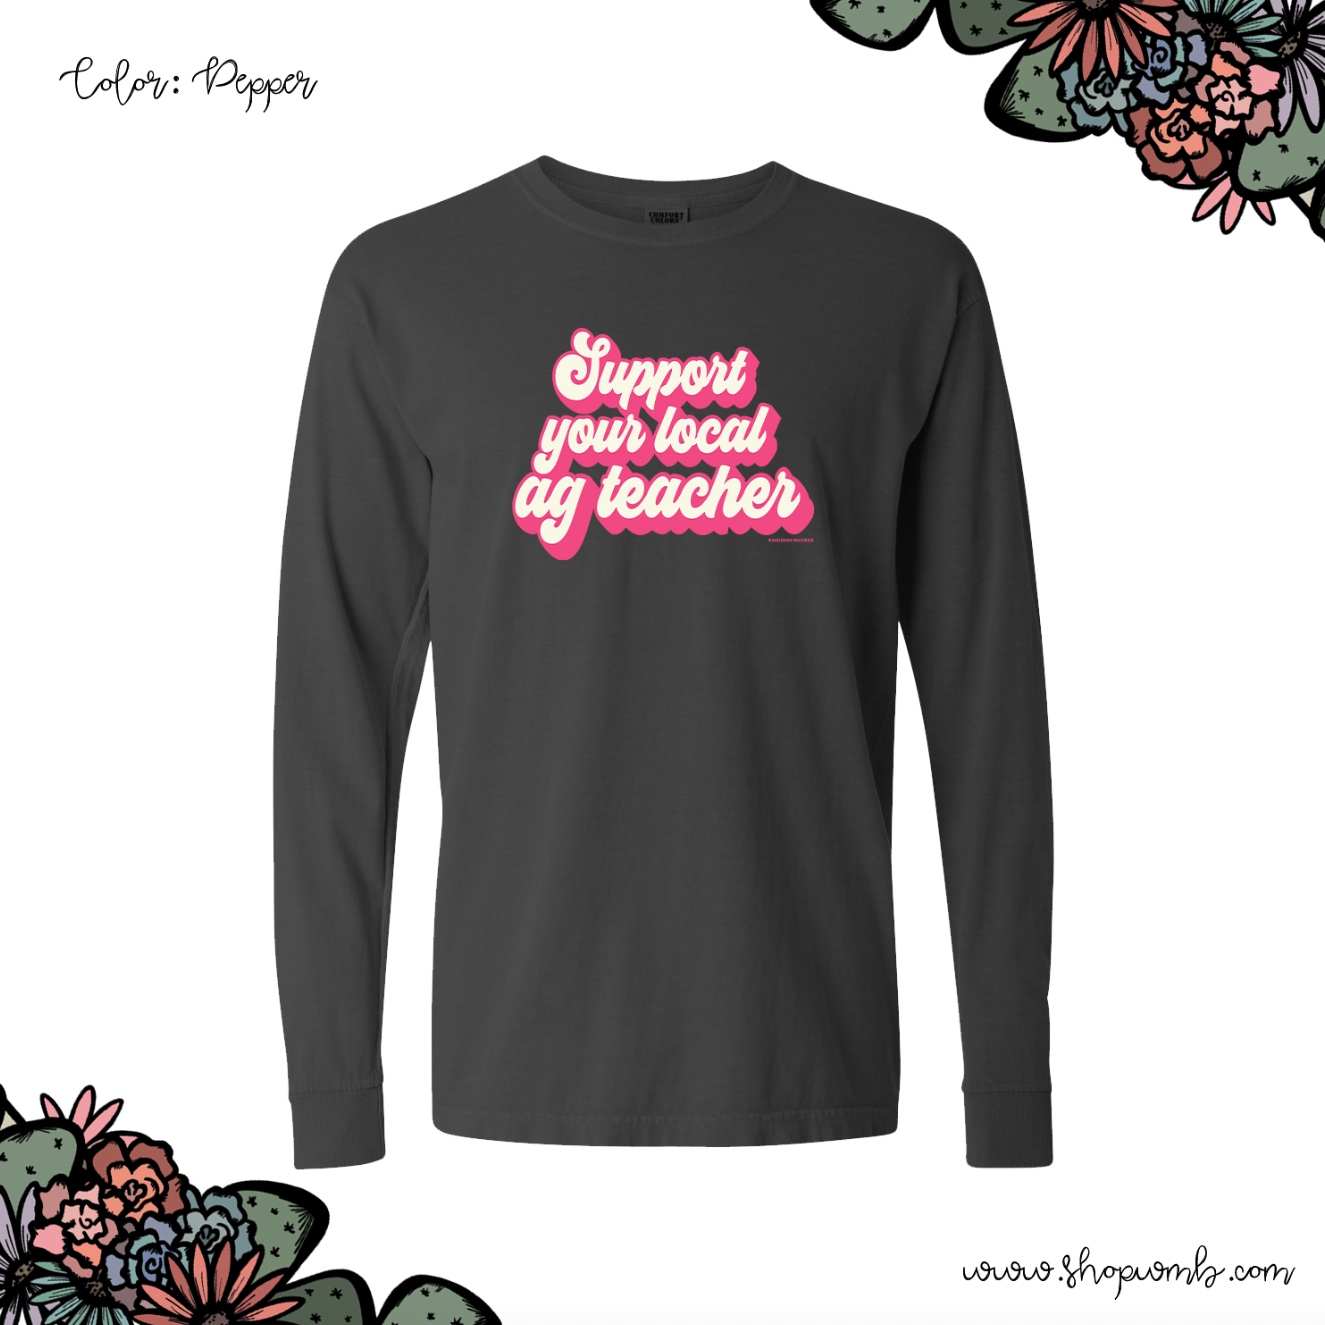 Retro Support Your Local Ag Teacher Pink LONG SLEEVE T-Shirt (S-3XL) - Multiple Colors!